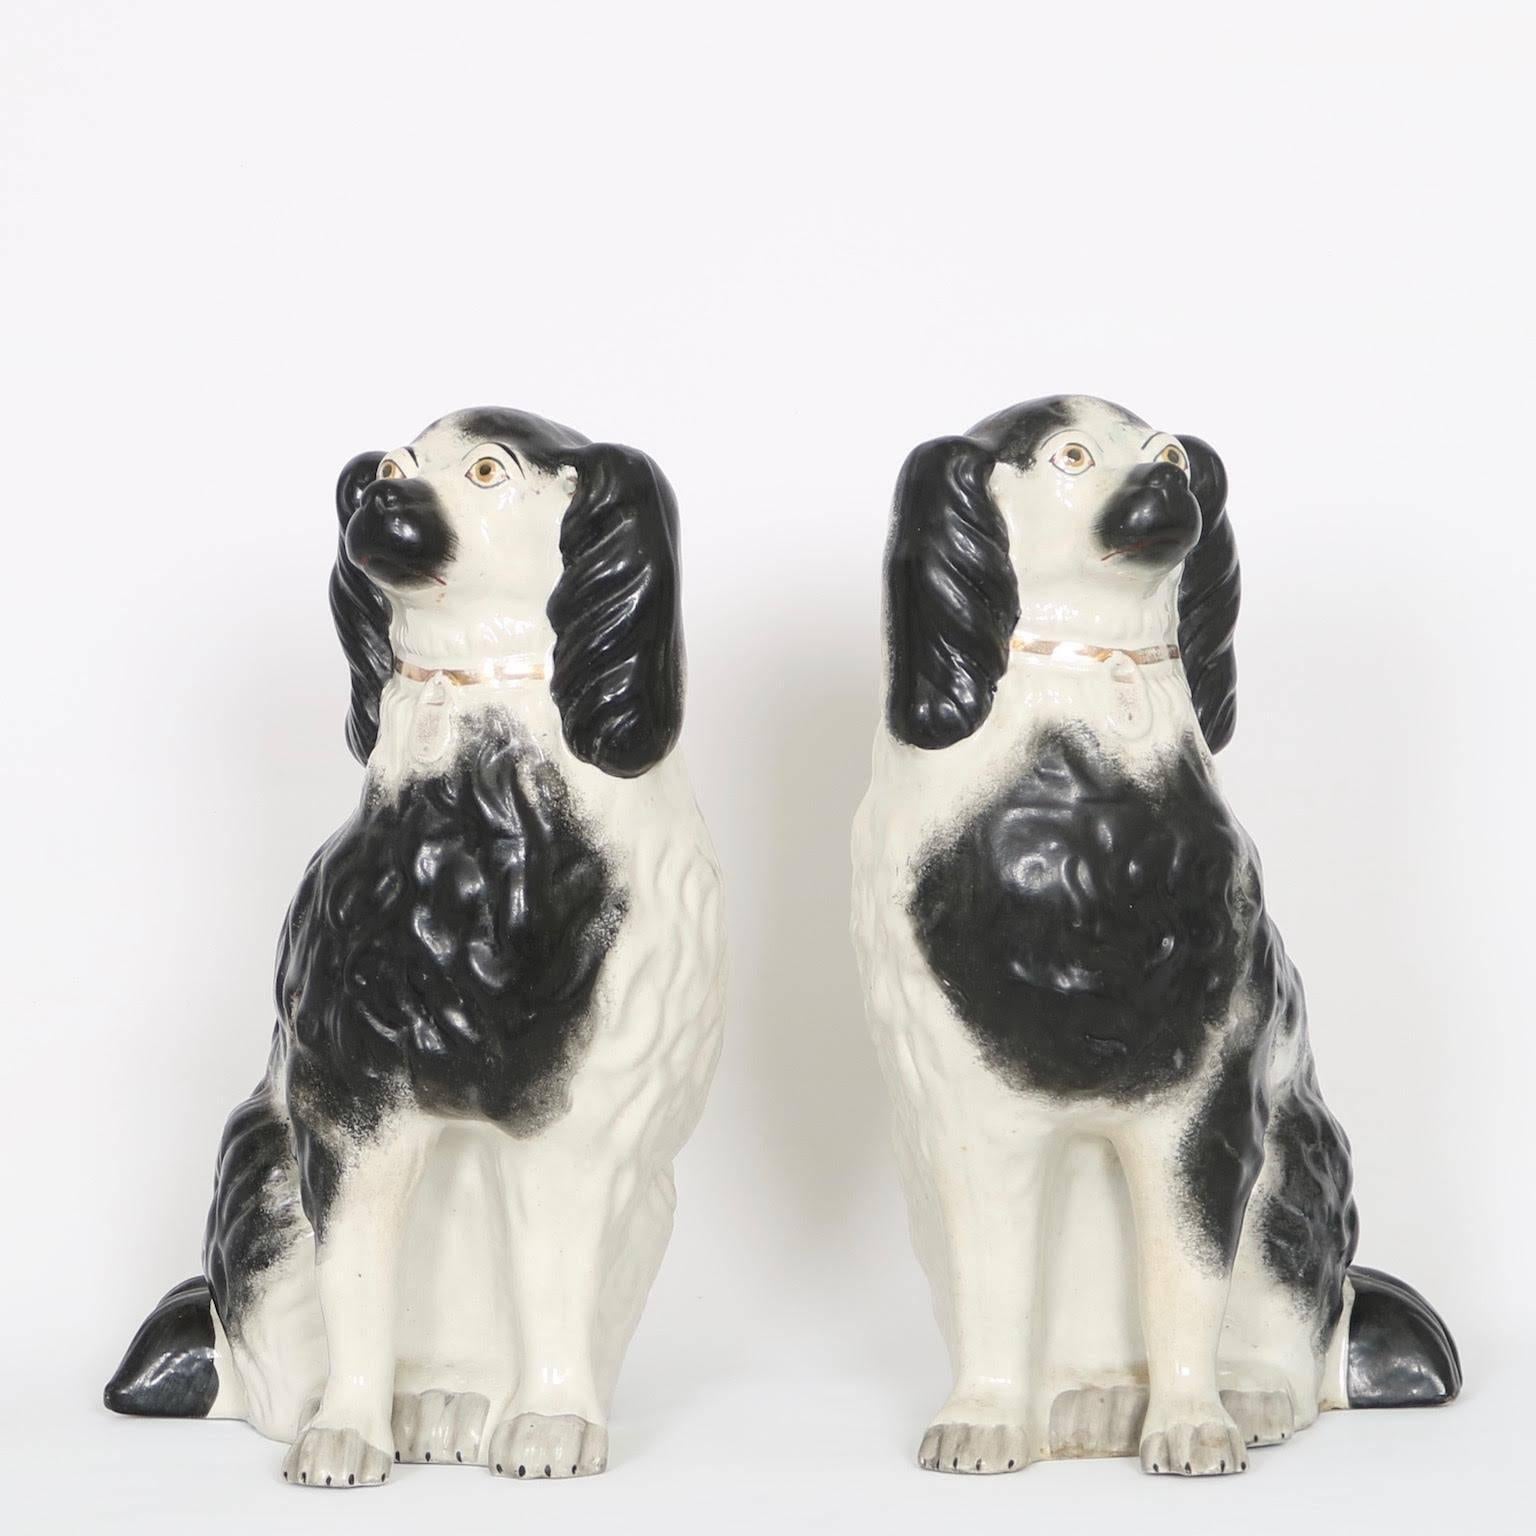 Pair of late 19th century Victorian era Staffordshire porcelain dogs, each with one leg separate from body, hand-painted with black and white accents and grey paws, gilding to the collars; no marks present. Excellent antique condition, wear and